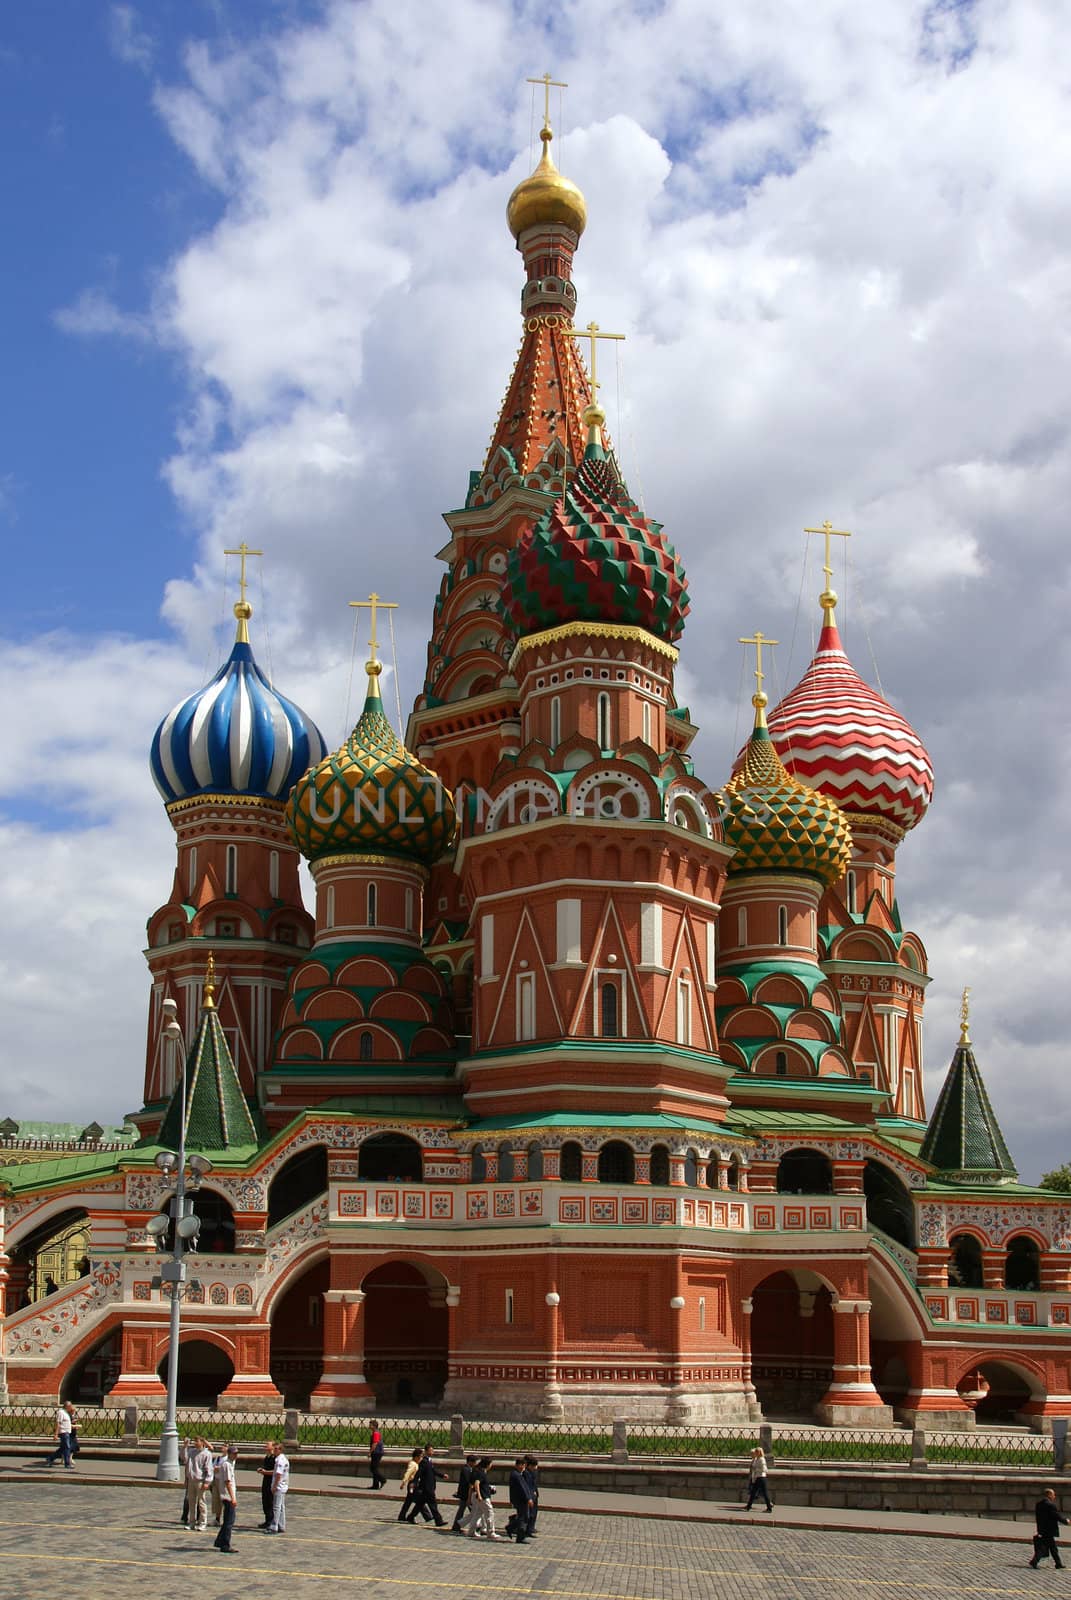 Church of desposition of Saint Virgin's Robe also known as Saint Basil's Cathedral of Red Suqre in Moscow, Russia